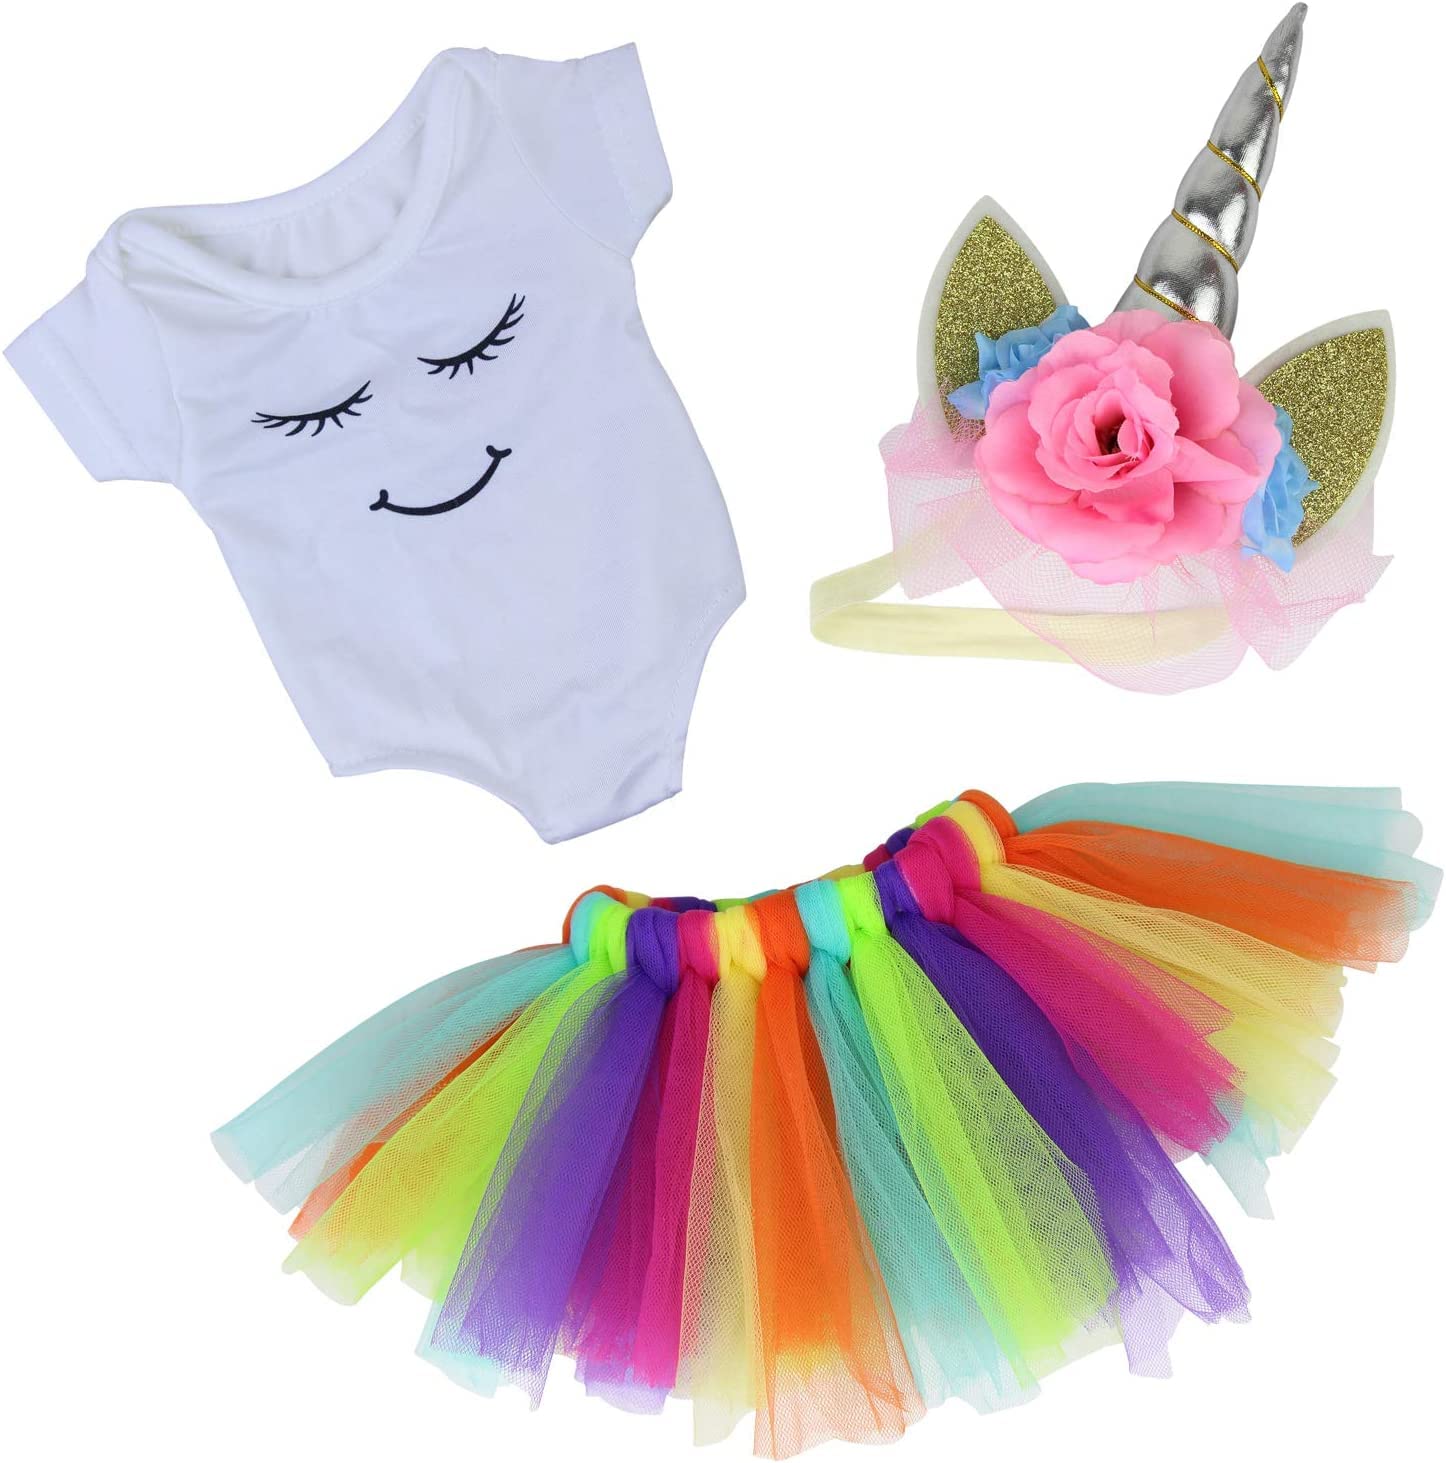 ZITA ELEMENT 18 in Girl Doll Clothes and Accessories Set - 1 Rainbow Tutu, 1 Jumpsuit and 1 Unicorn Headband for 18 Inch Dolls Girls Birthday